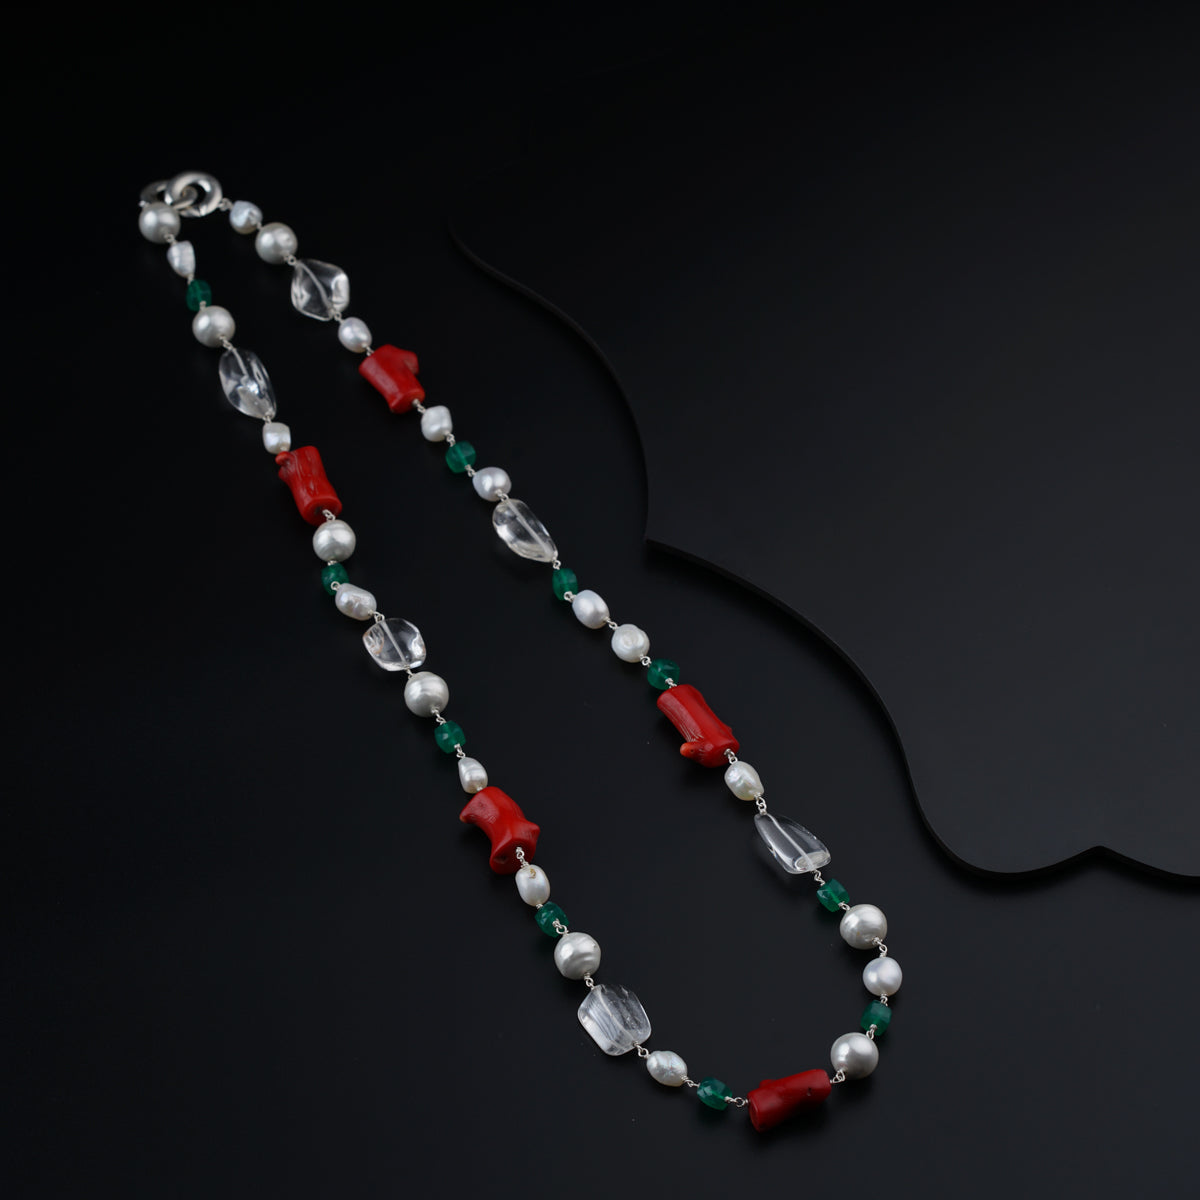 a red and green beaded necklace on a black surface